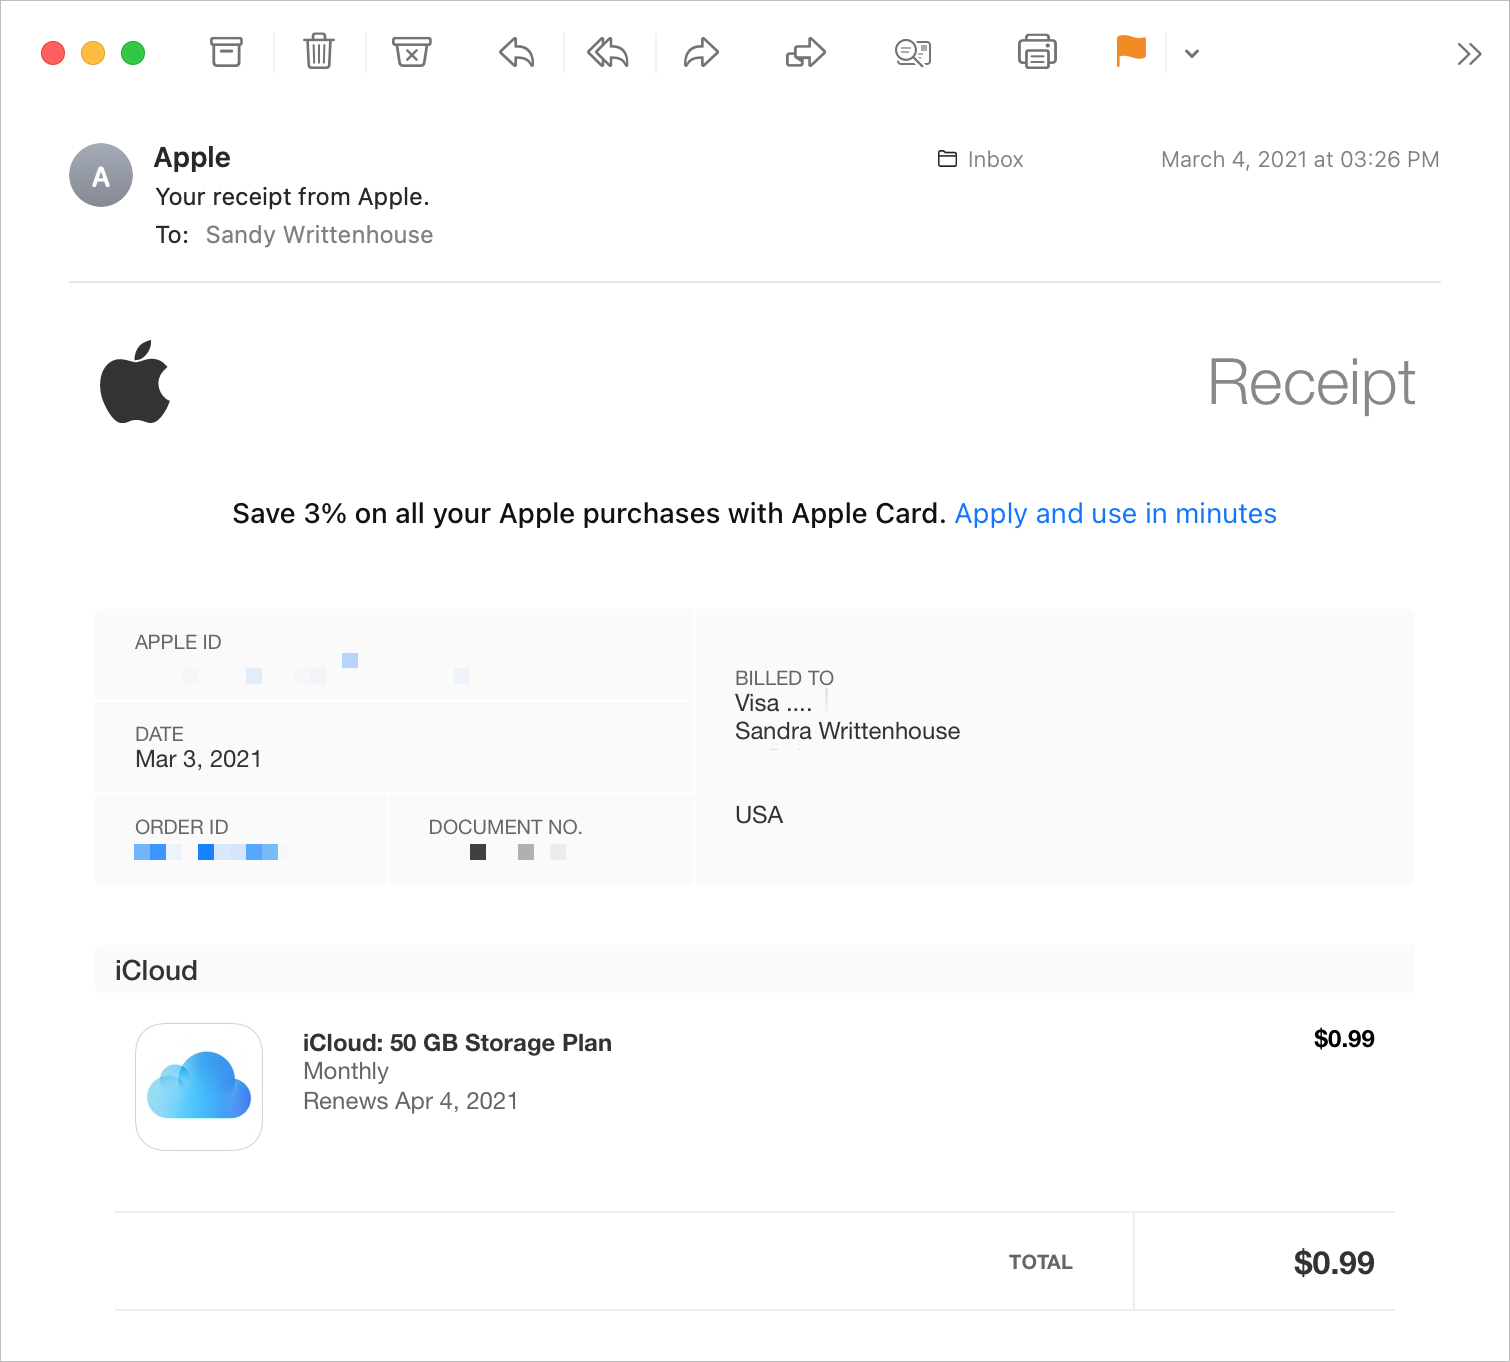 Email Reciept for Apple Purchase